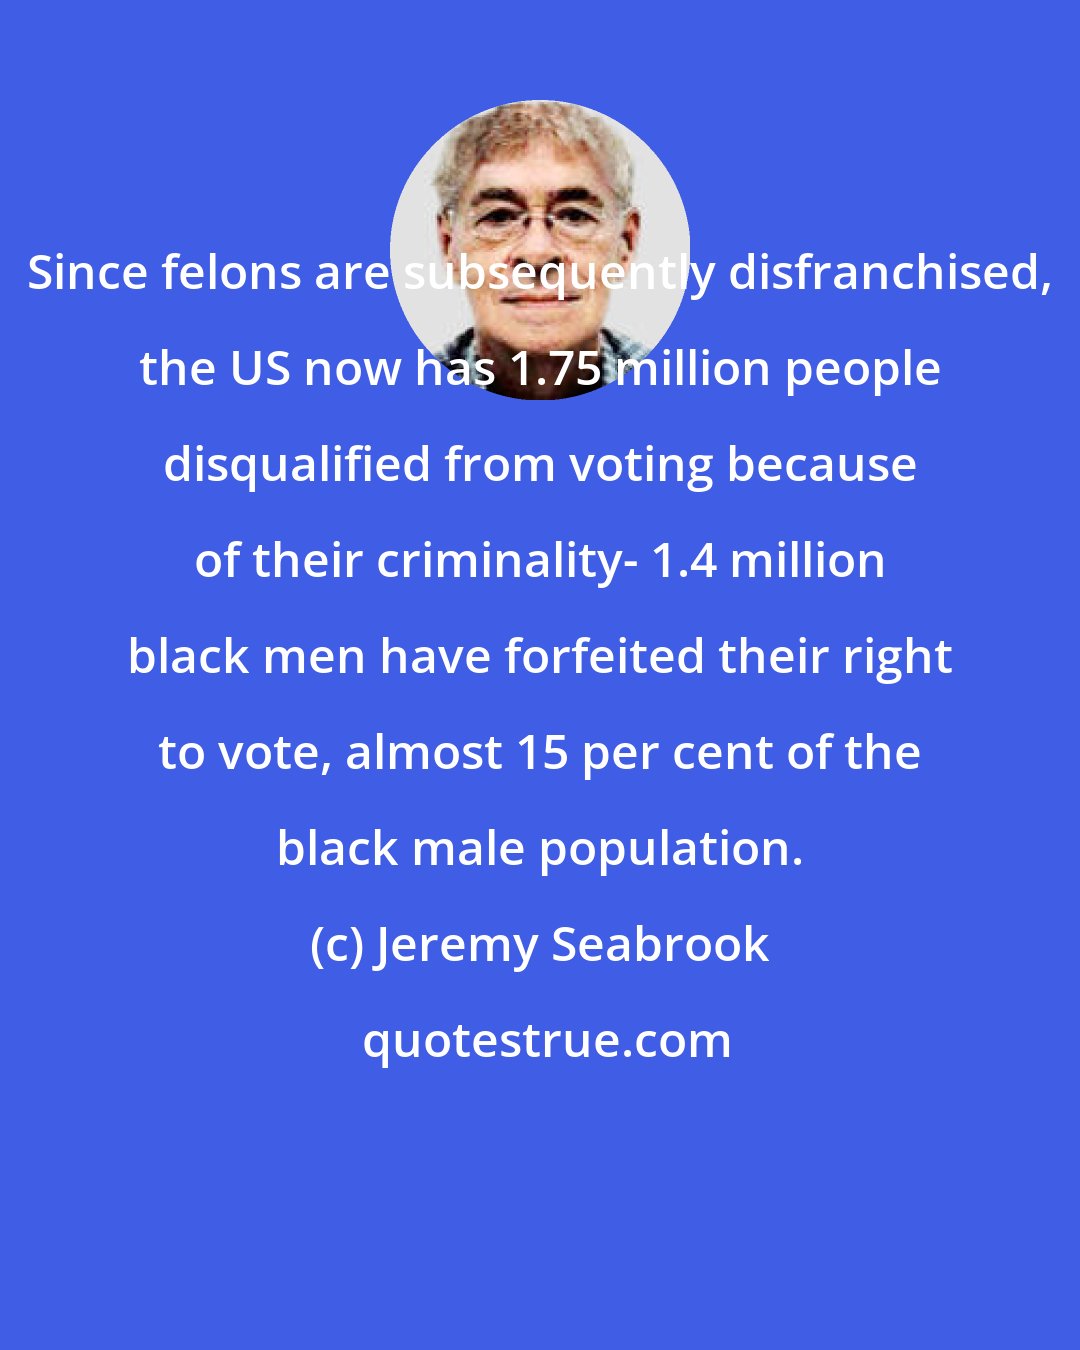 Jeremy Seabrook: Since felons are subsequently disfranchised, the US now has 1.75 million people disqualified from voting because of their criminality- 1.4 million black men have forfeited their right to vote, almost 15 per cent of the black male population.